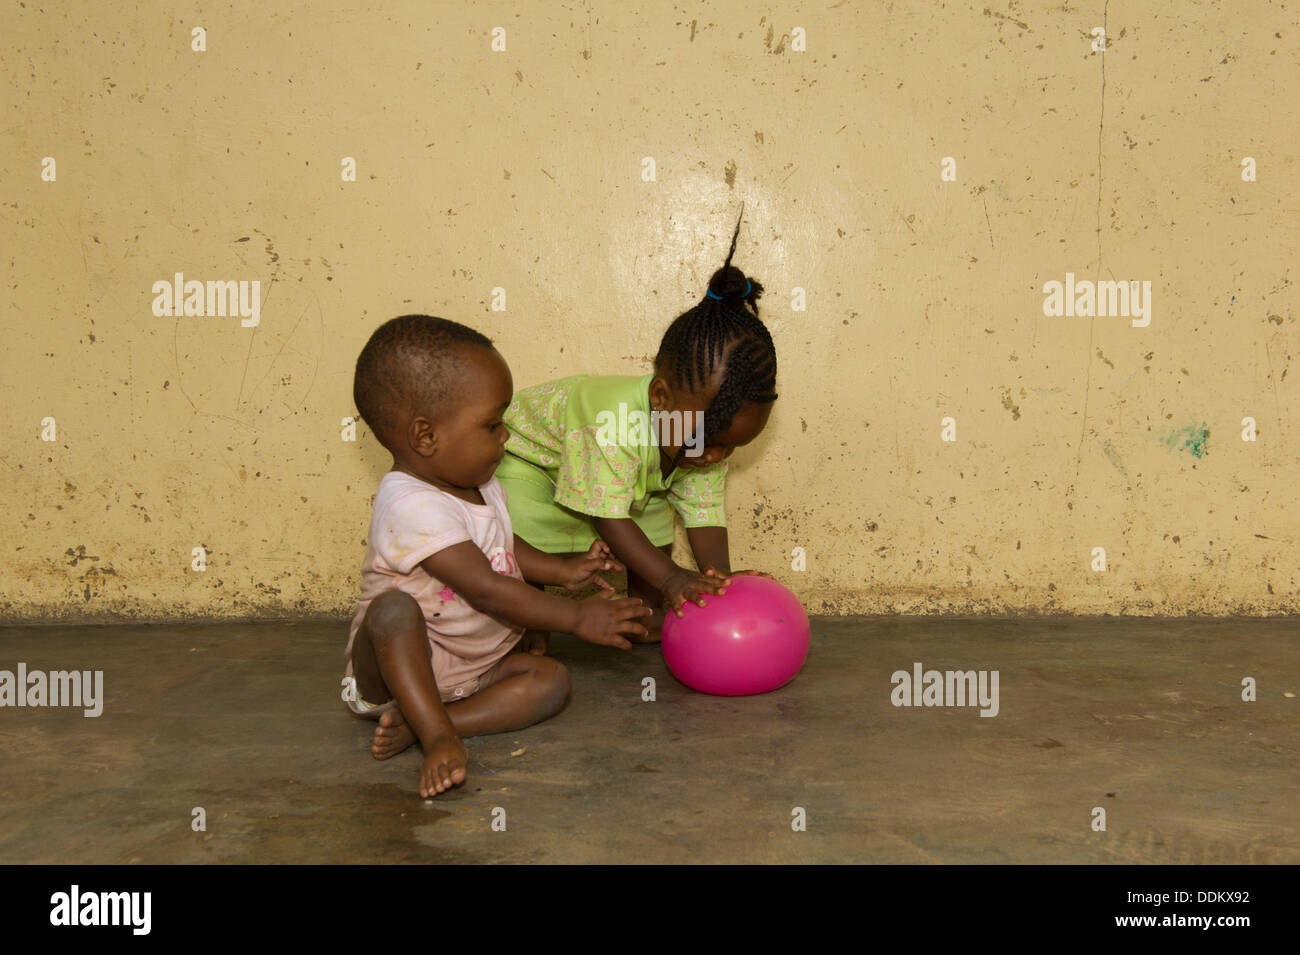 Toddlers seating on a concrete floor in Nigeria Stock Photo